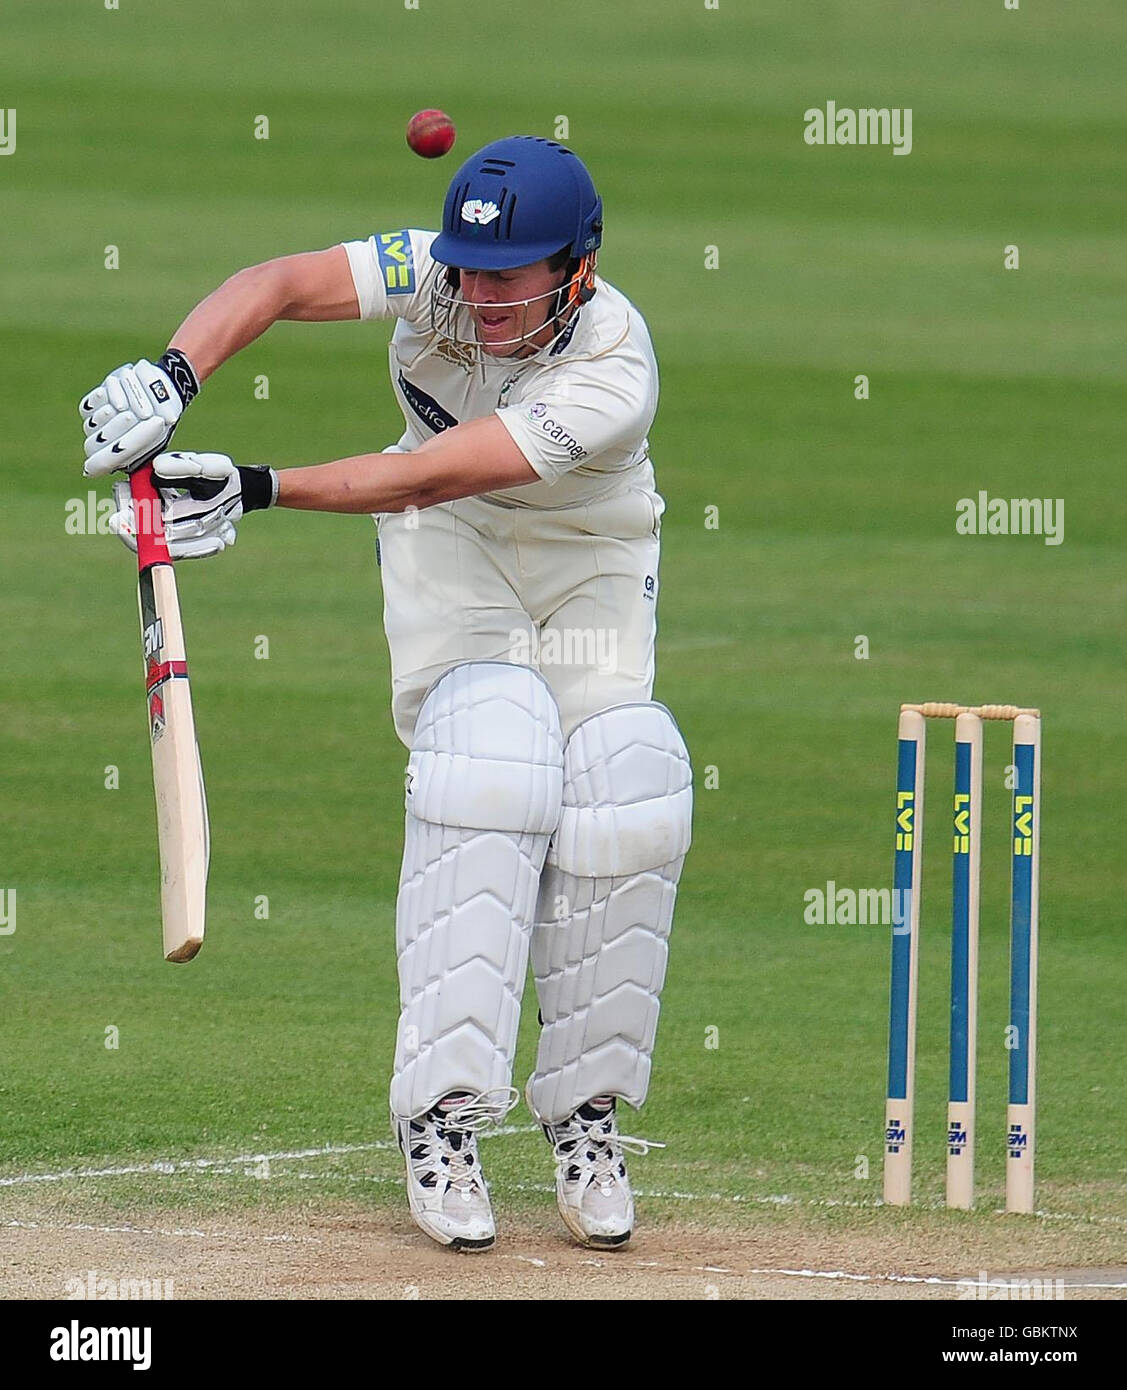 Yorkshire's Joe Sayers is caught by Durham's Liam Plunkett (out of picture) during the Liverpool Victoria County Championship match at Chester le Street, Durham. Stock Photo